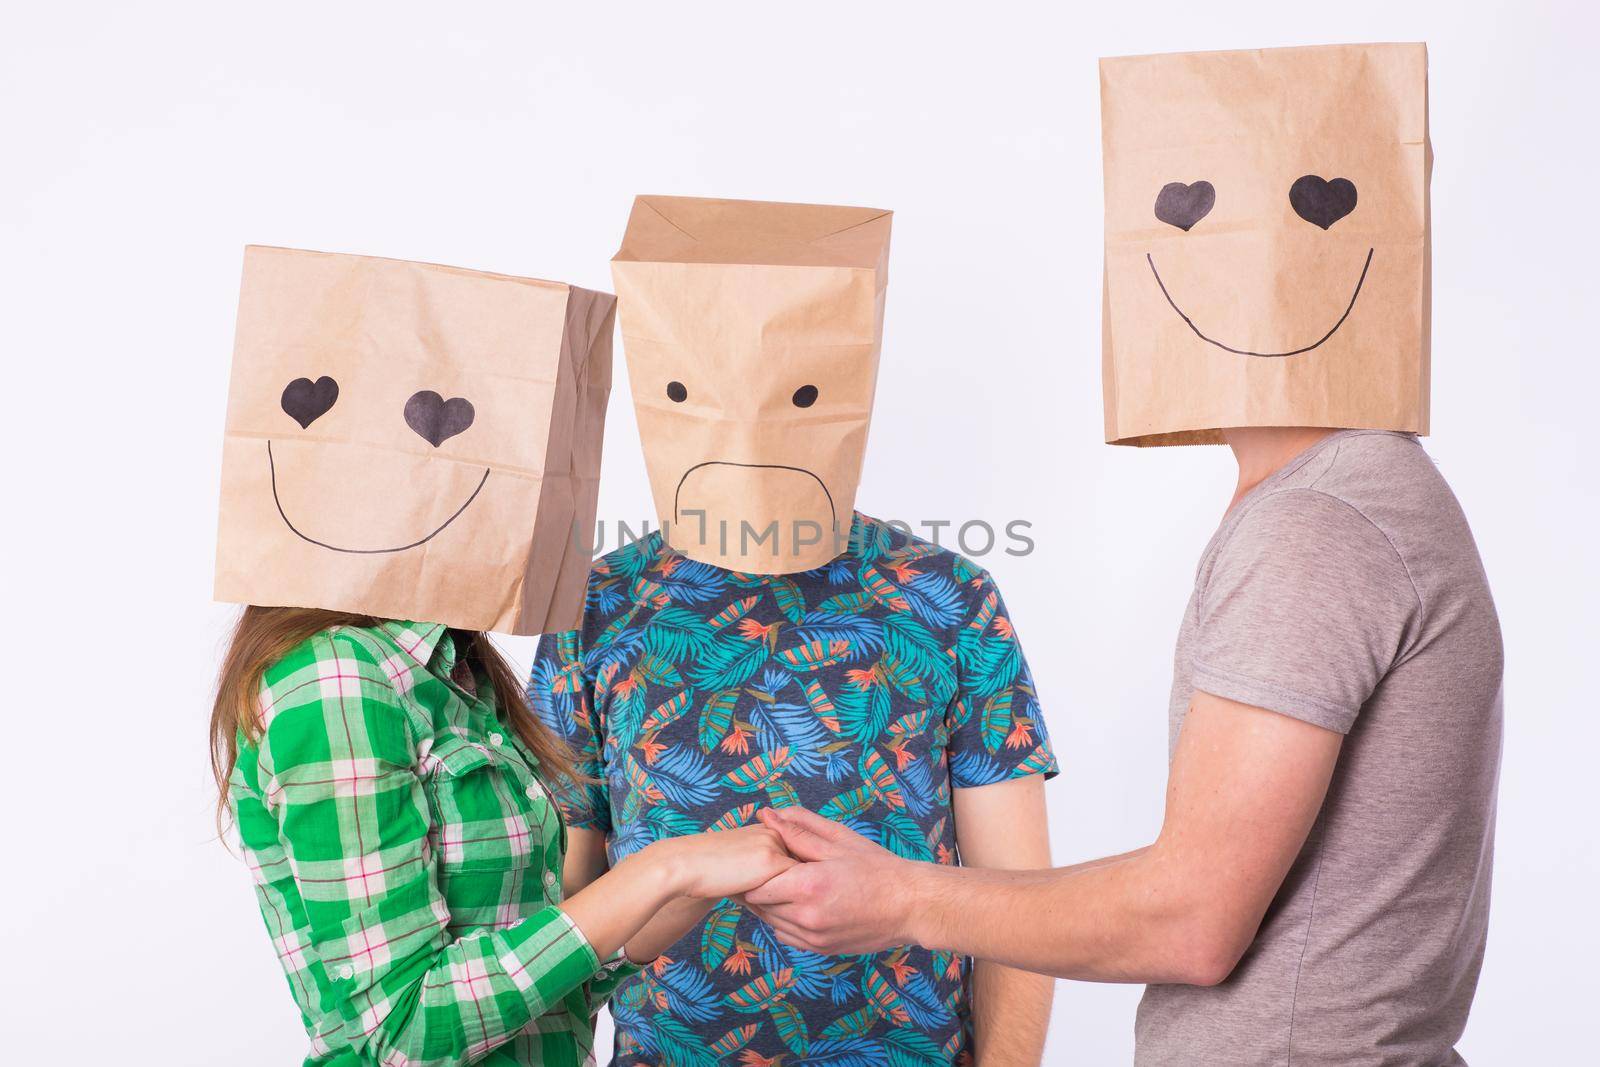 Love triangle, jealousy and unrequited love concept - woman and man with bags over heads holding hands and another man is angry. by Satura86